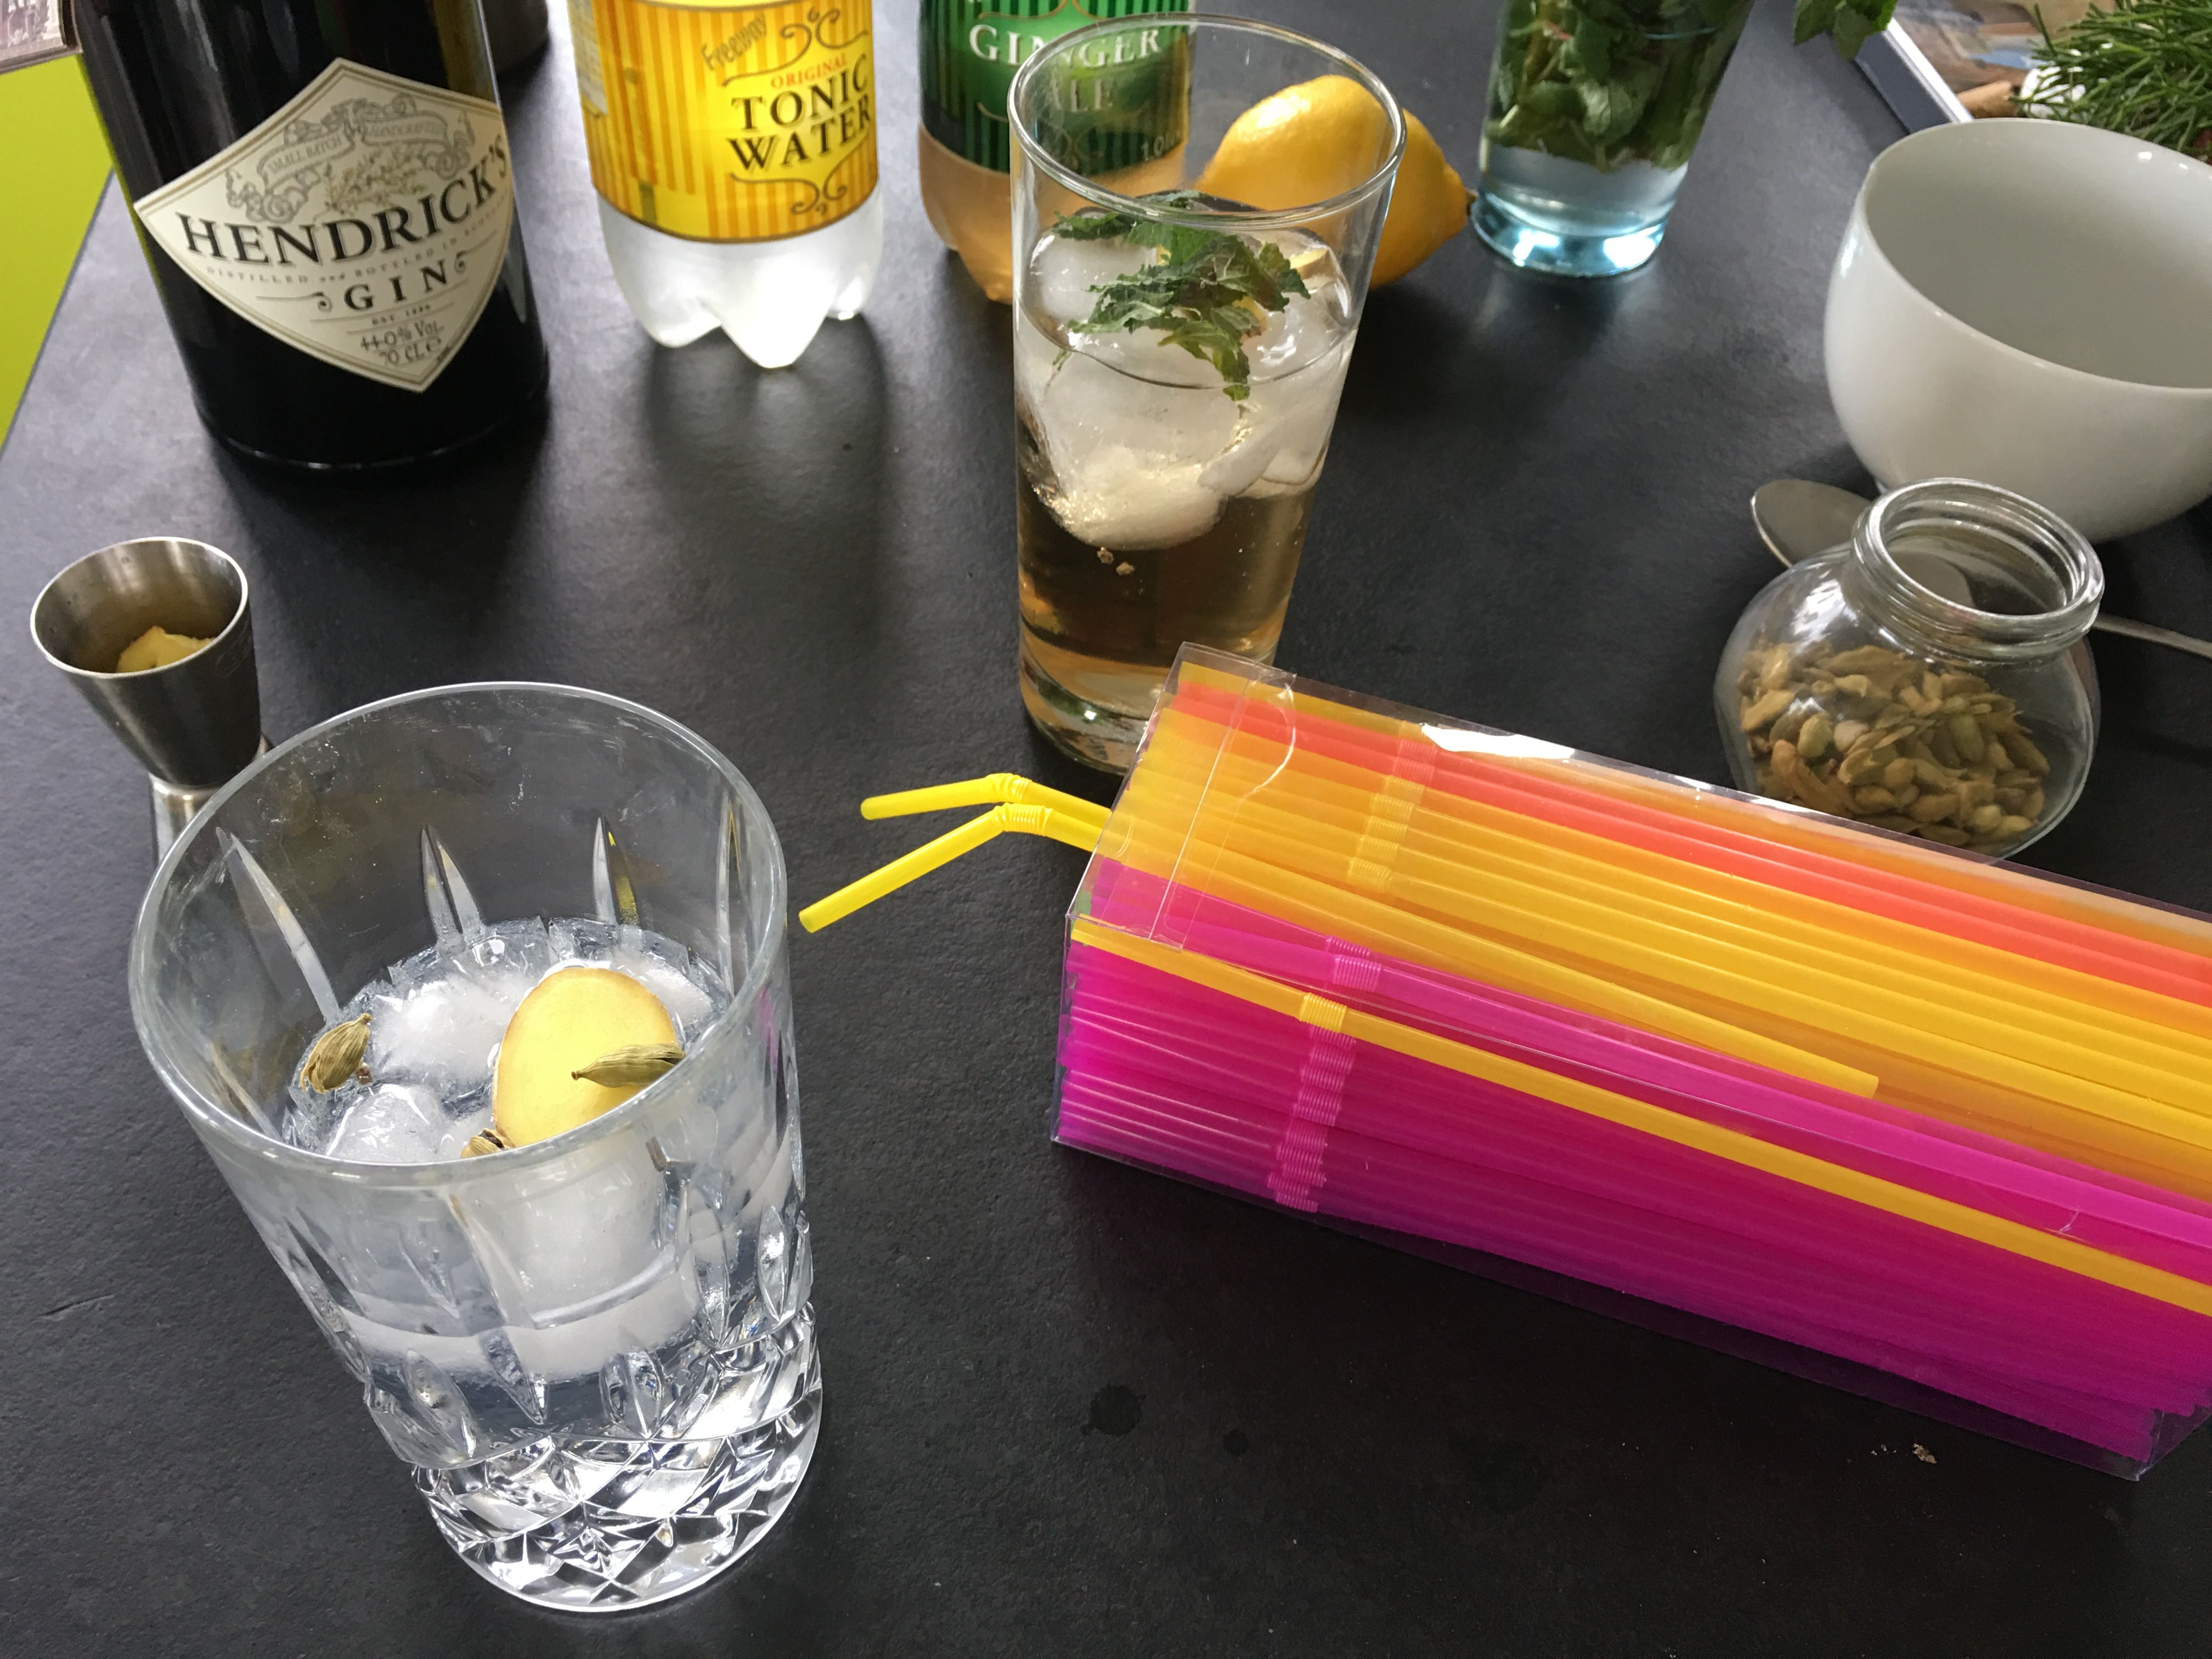 Gin Tonic on Steemit - A How To by Detlev (22).JPG